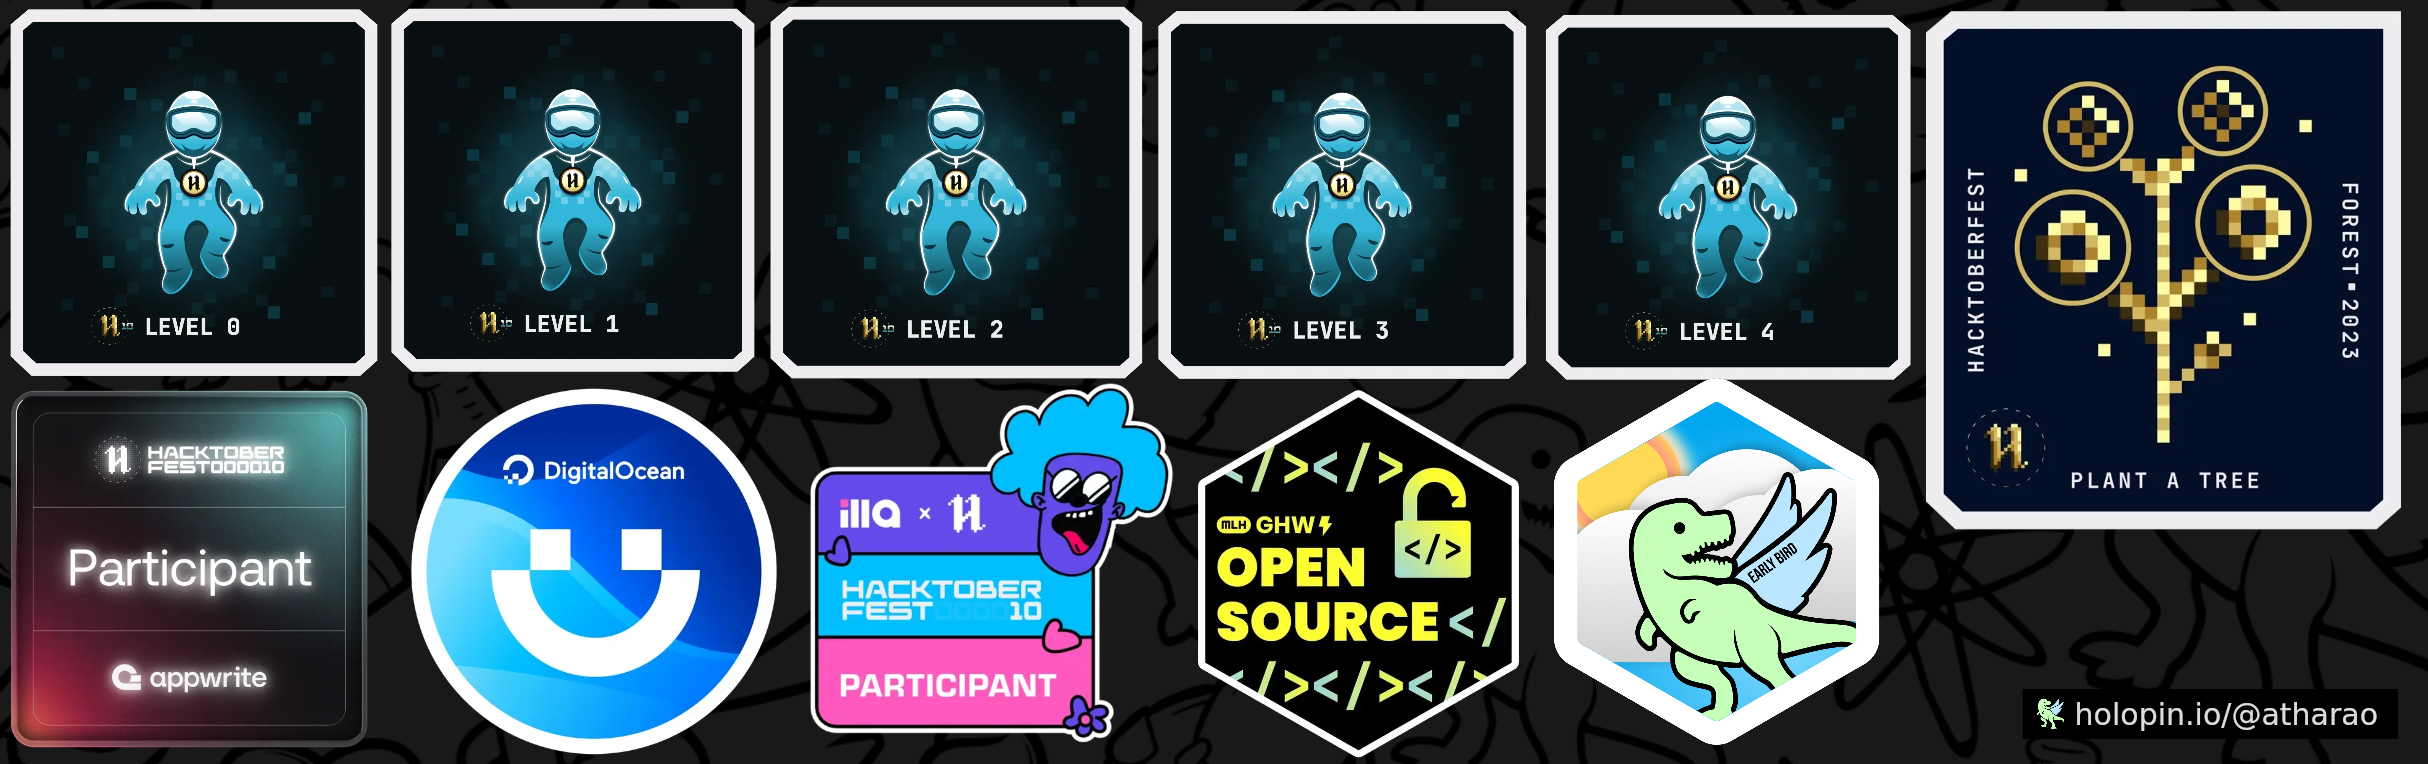 An image of @atharao's Holopin badges, which is a link to view their full Holopin profile